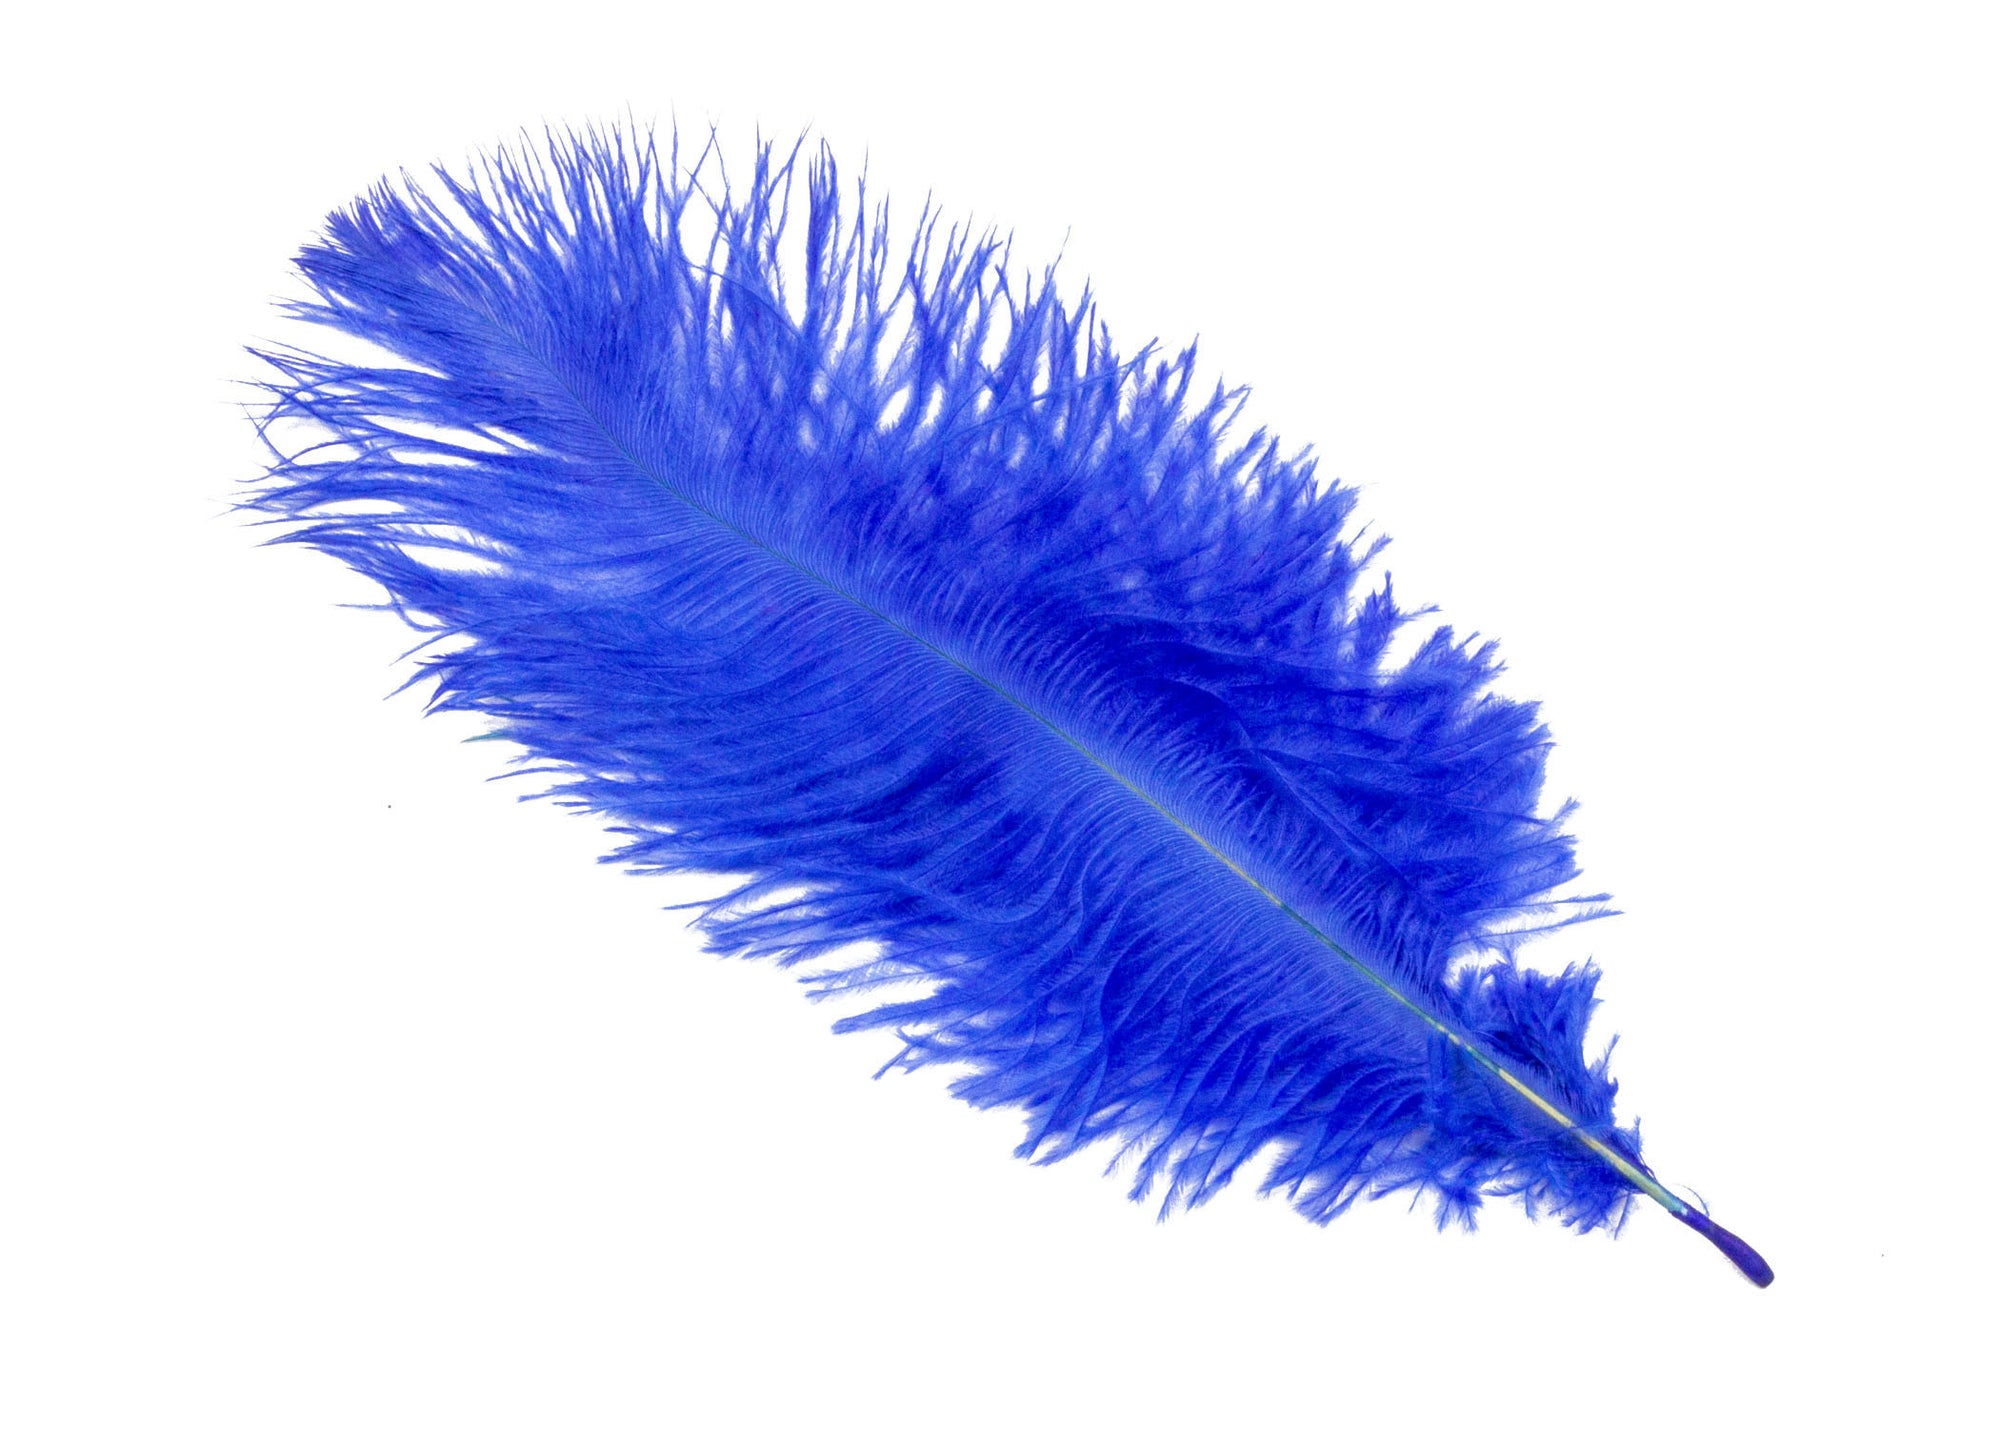 10 TURKEY QUILLS 10-12 Dyed ROYAL BLUE Craft Feathers; Indian Dress  Costume